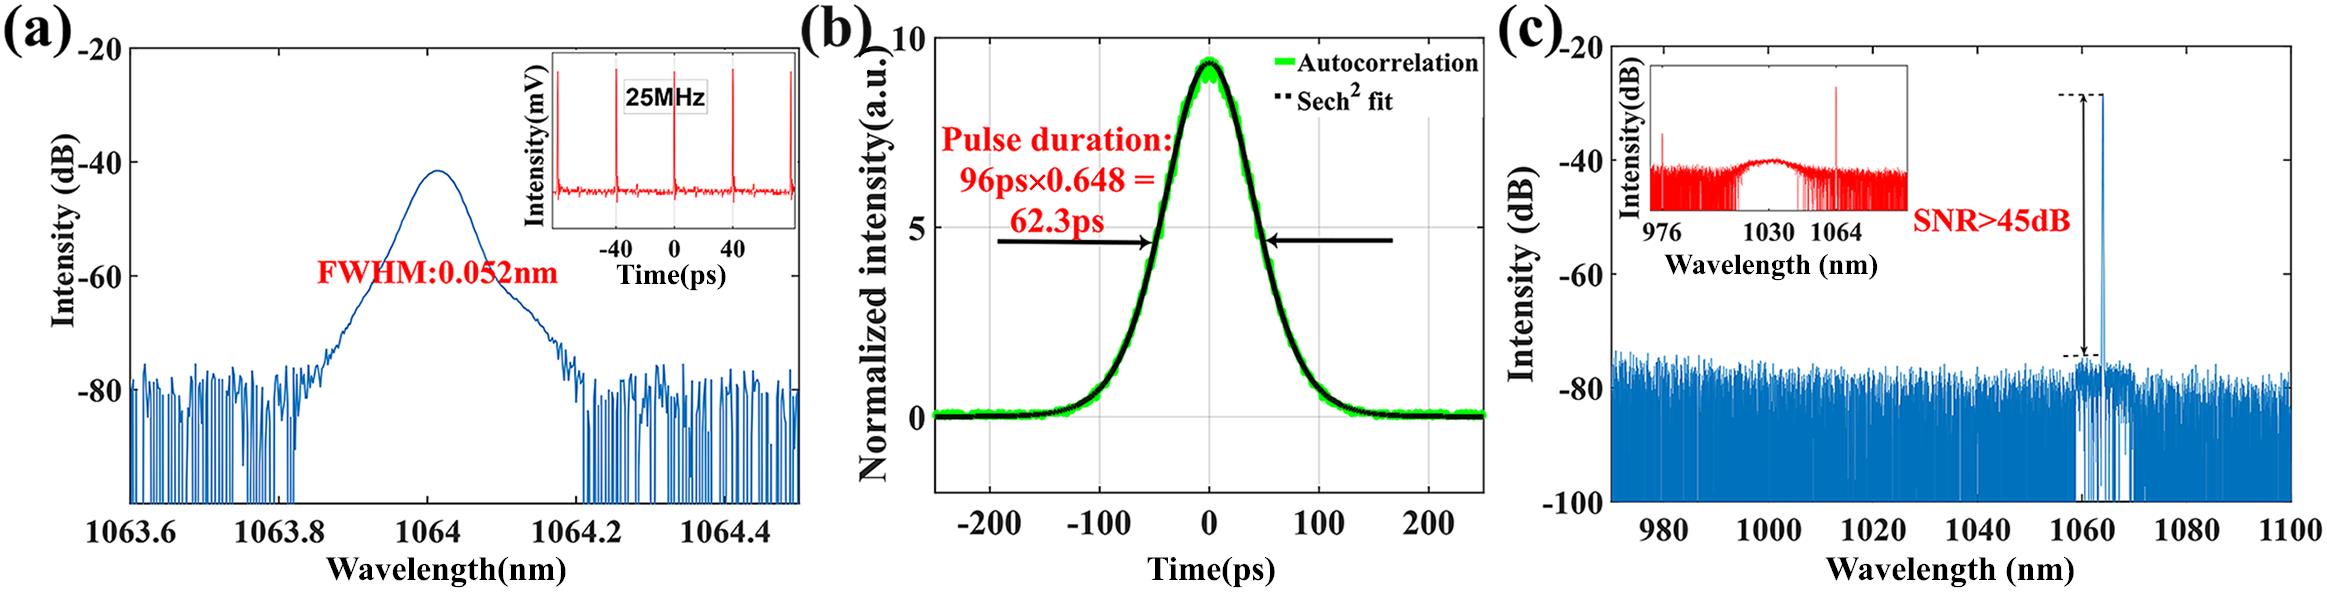 Measurement results of the seed: (a) spectral width in the logarithmic scale (with a resolution of 0.02 nm); (inset) snapshot of pulse train; (b) trace of intensity autocorrelation; (c) spectrum of pre-amplified signal: after and (inset) before the BPF2.